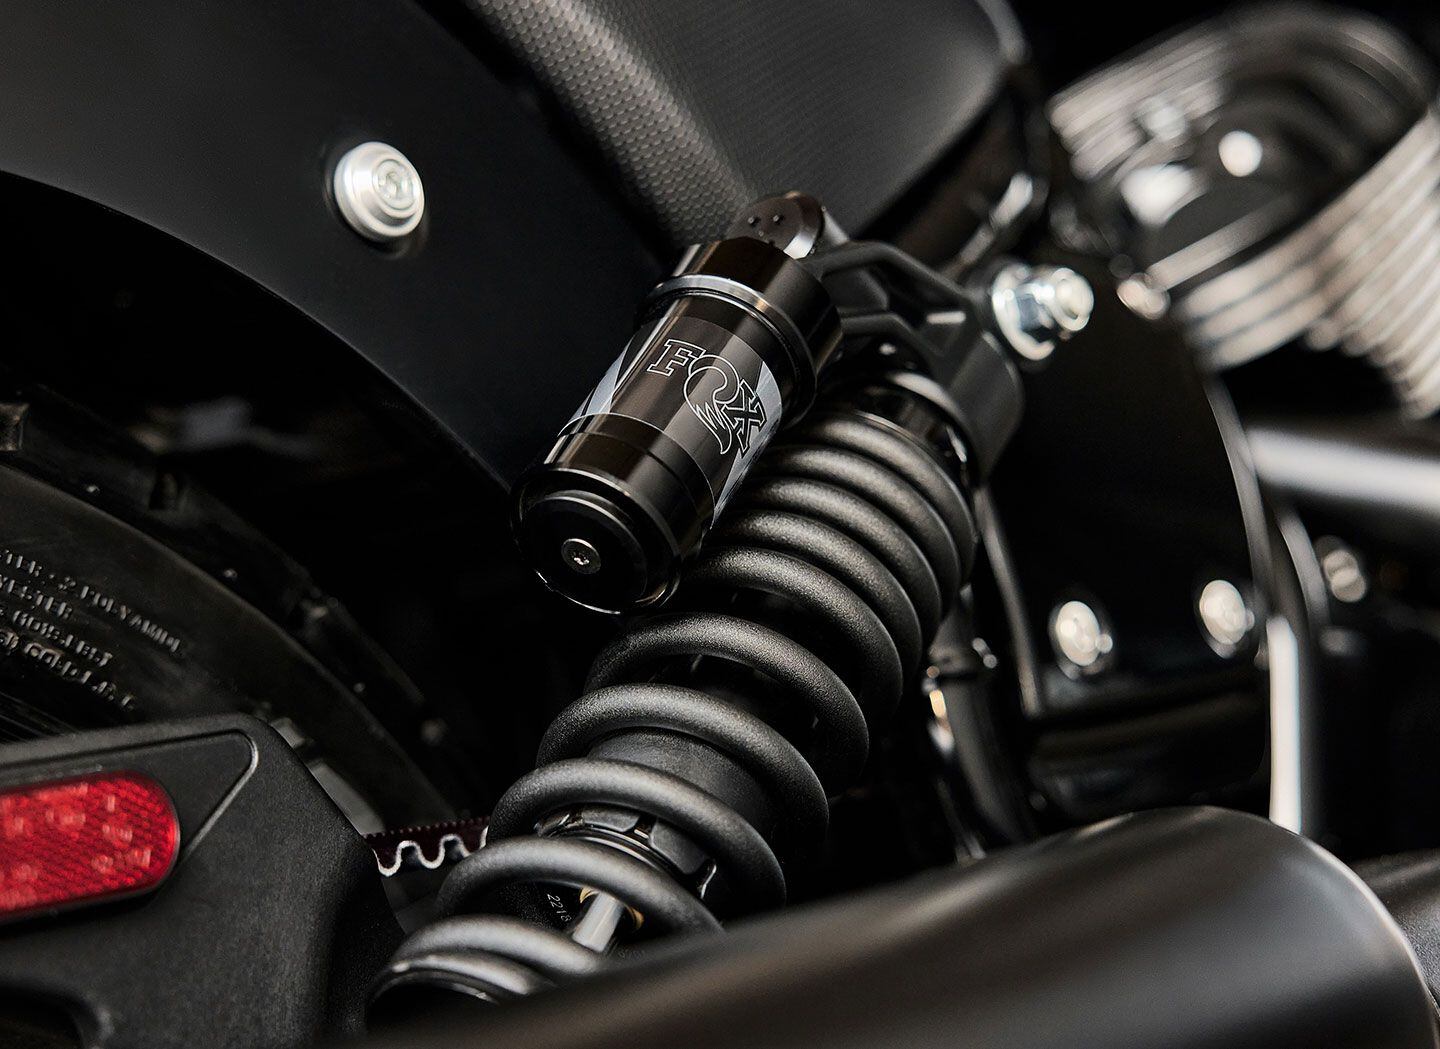 Exposed Fox piggyback shocks offer longer travel and are adjustable for preload on the Sport Chief.